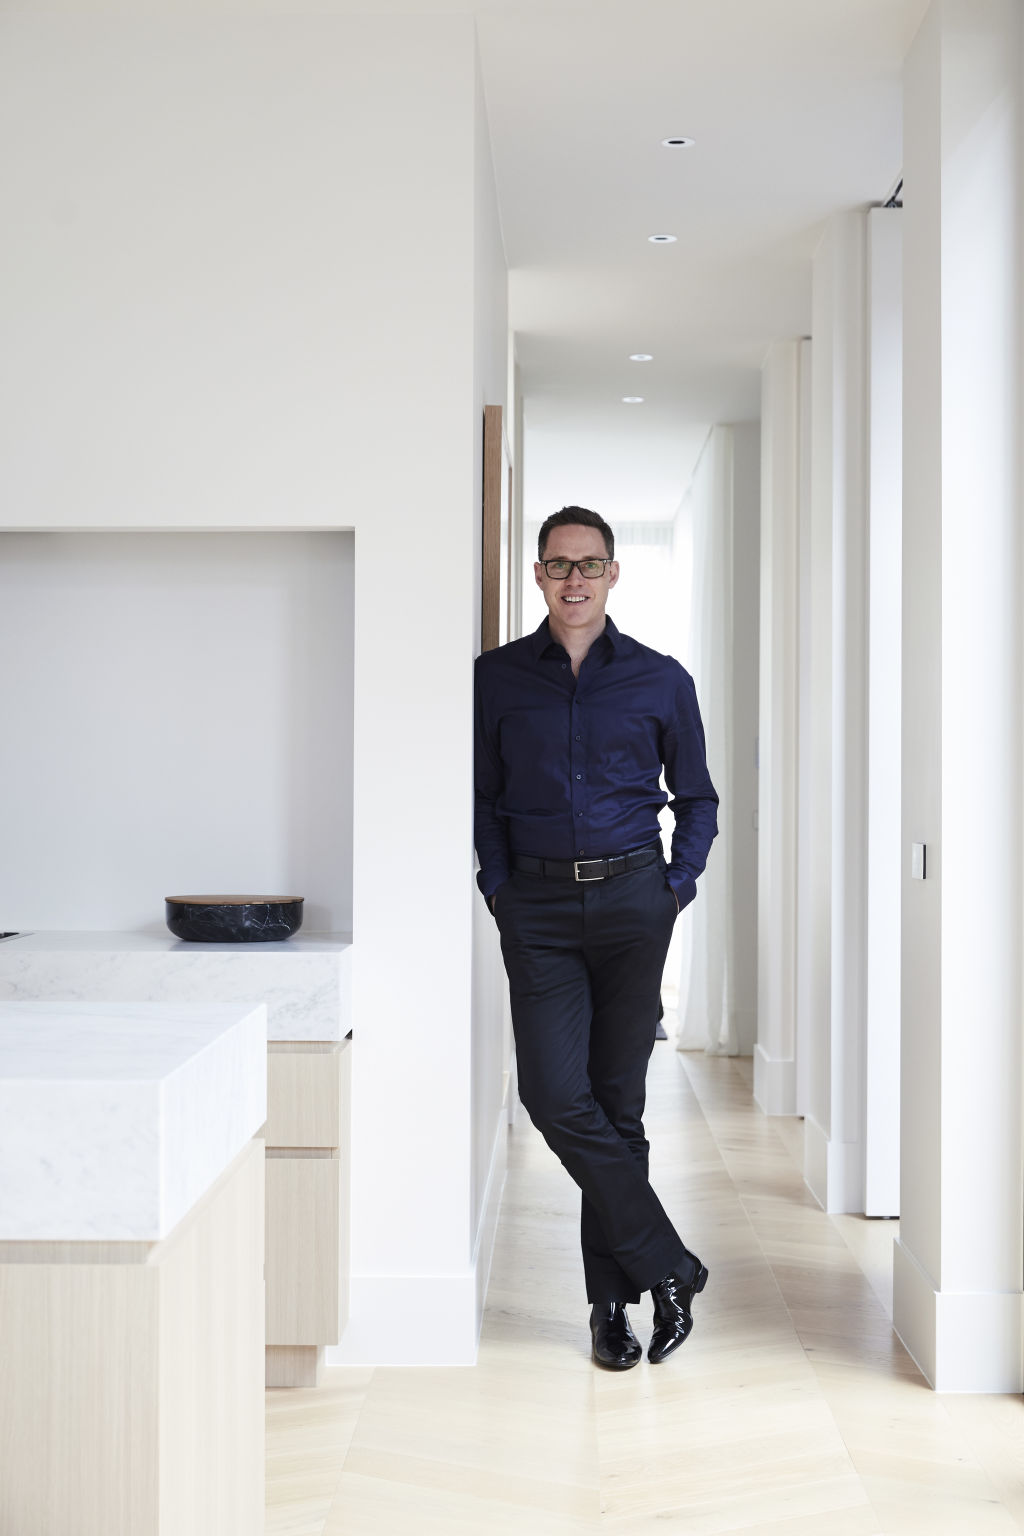 Meet the architect who has perfected the minimalist-classical look